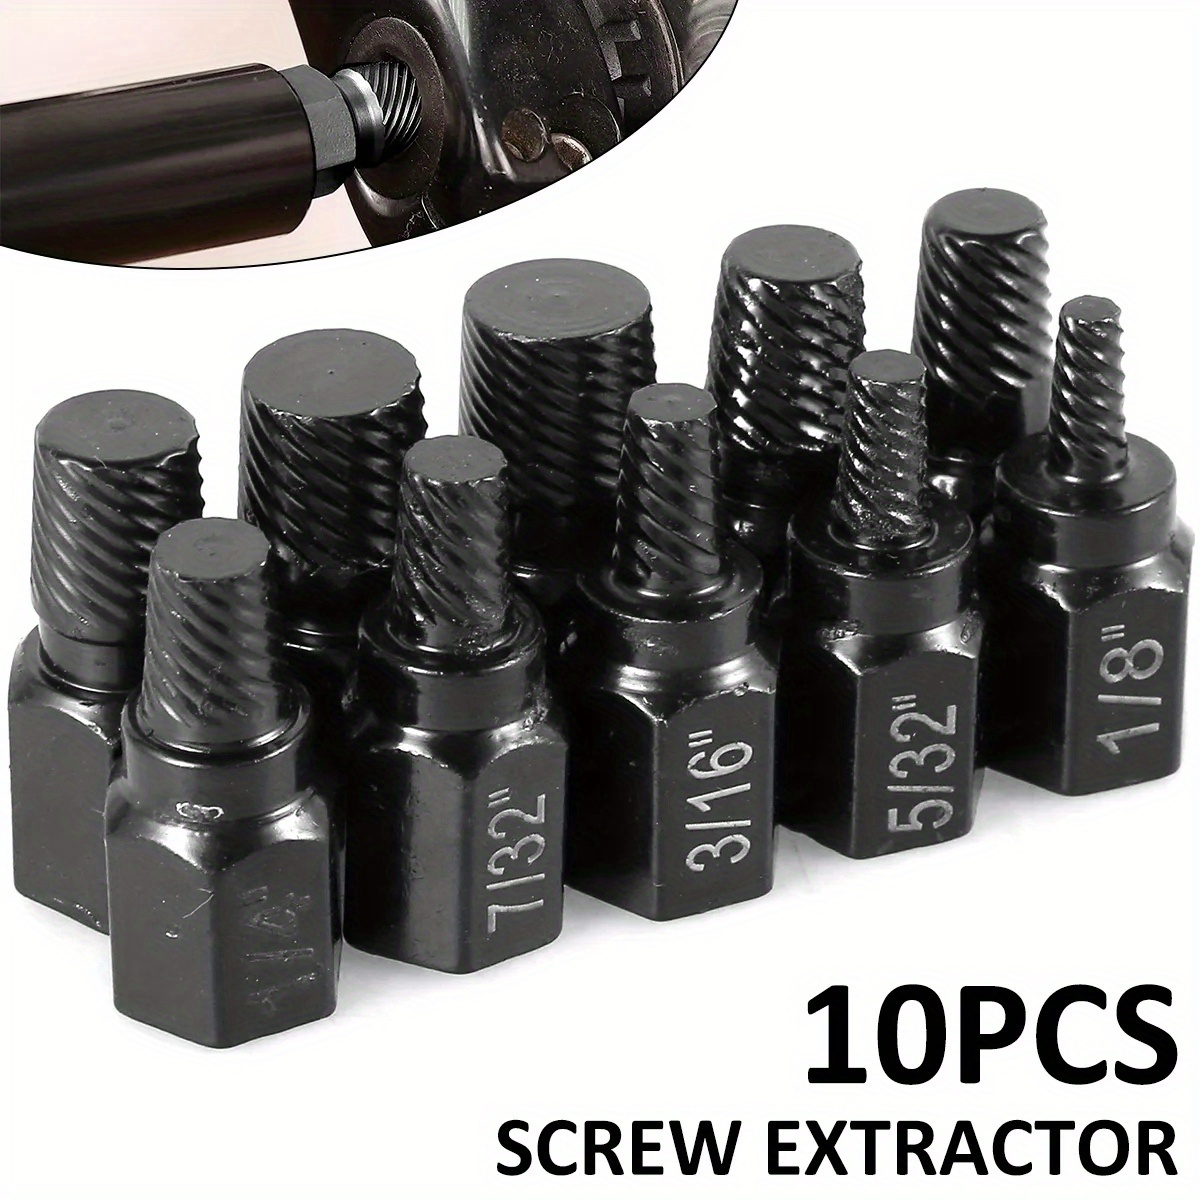 

10pcs Alloy Steel Damaged Screw Remover Set Screw Extractor Kit Metal Easy Out Drill Bits Bolt Stud Multiple Spline Screw Extractor